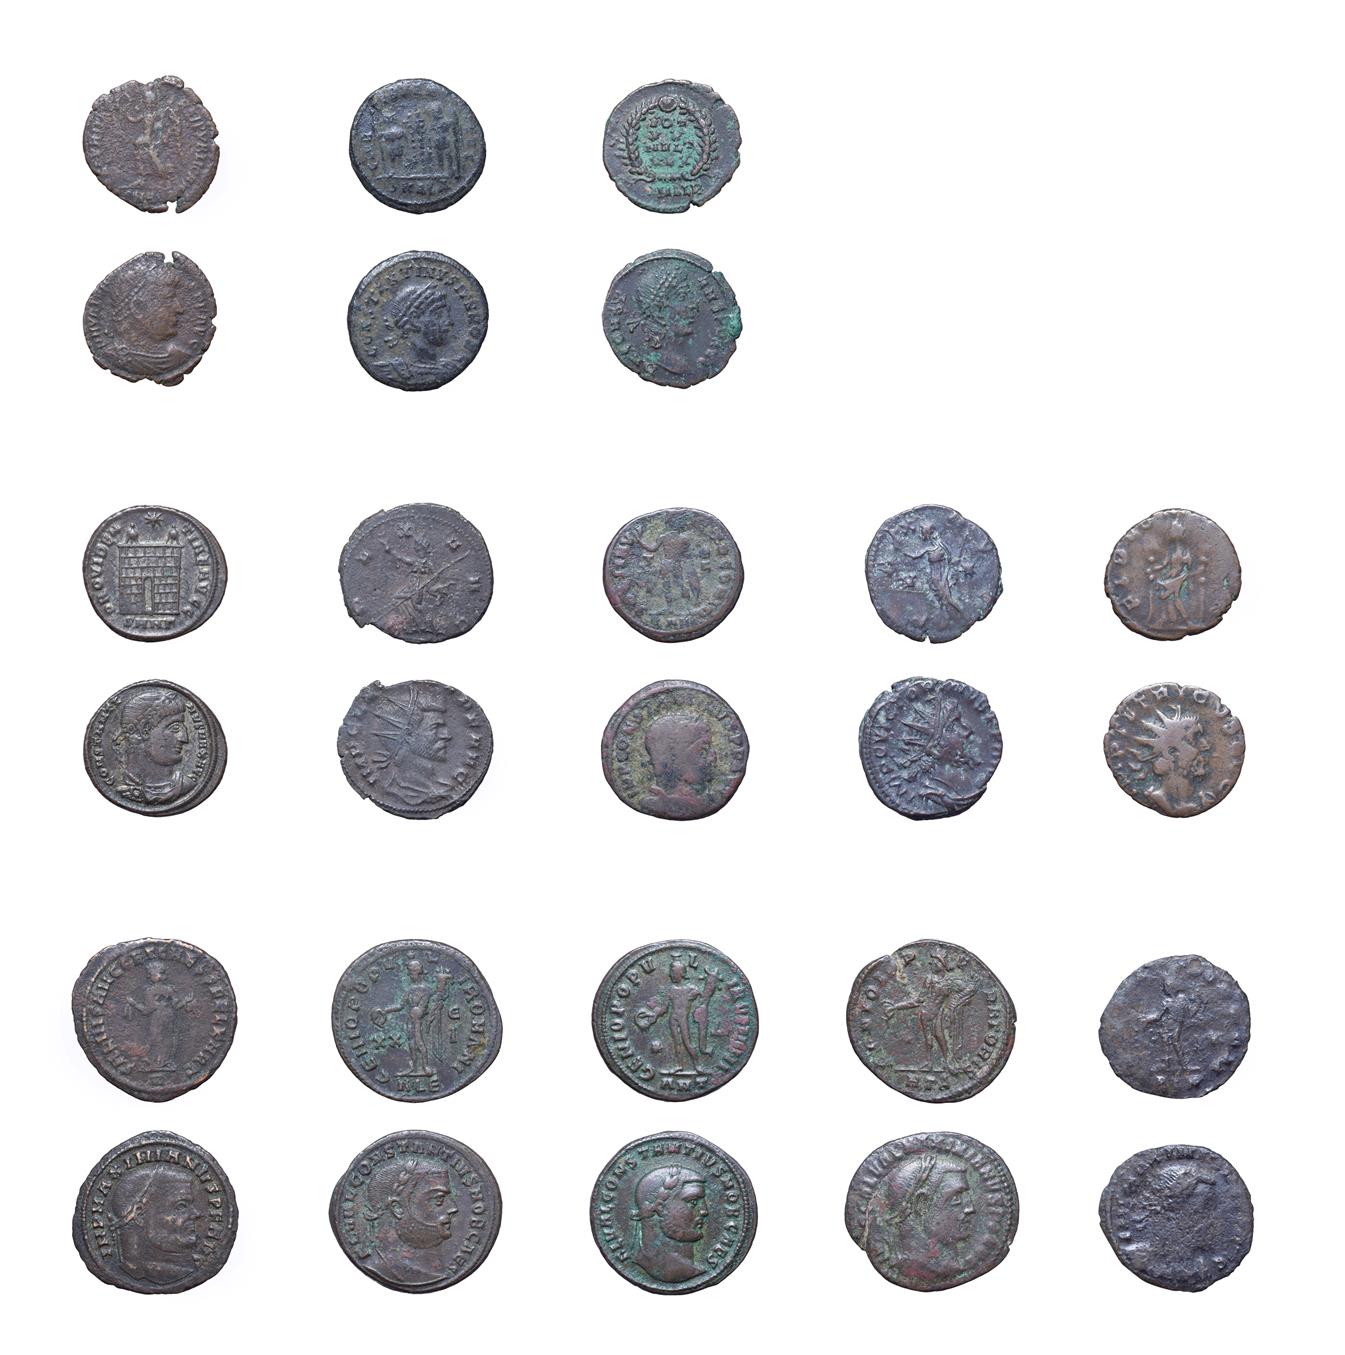 Lot 4030 - A Group of 13 x Late Roman Bronze Coins, 268 - 350 A.D. consisting of: Claudius II...